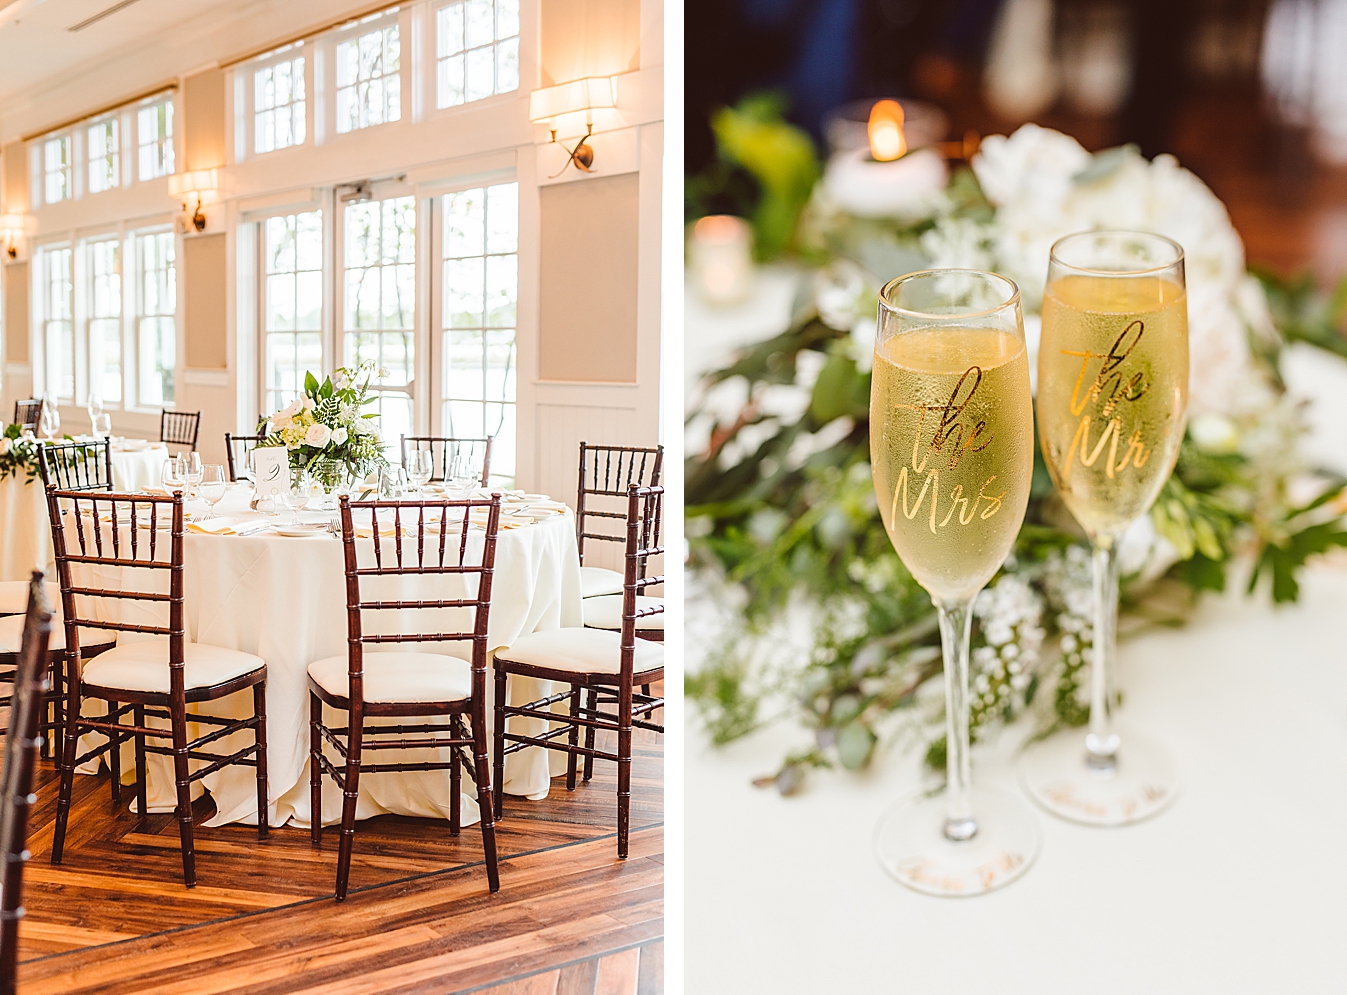 Dark brown chairs with white table cloths and classic white floral arrangements at wedding reception | Mr. and Mrs. champagne glasses at wedding | Brooke Michelle Photo